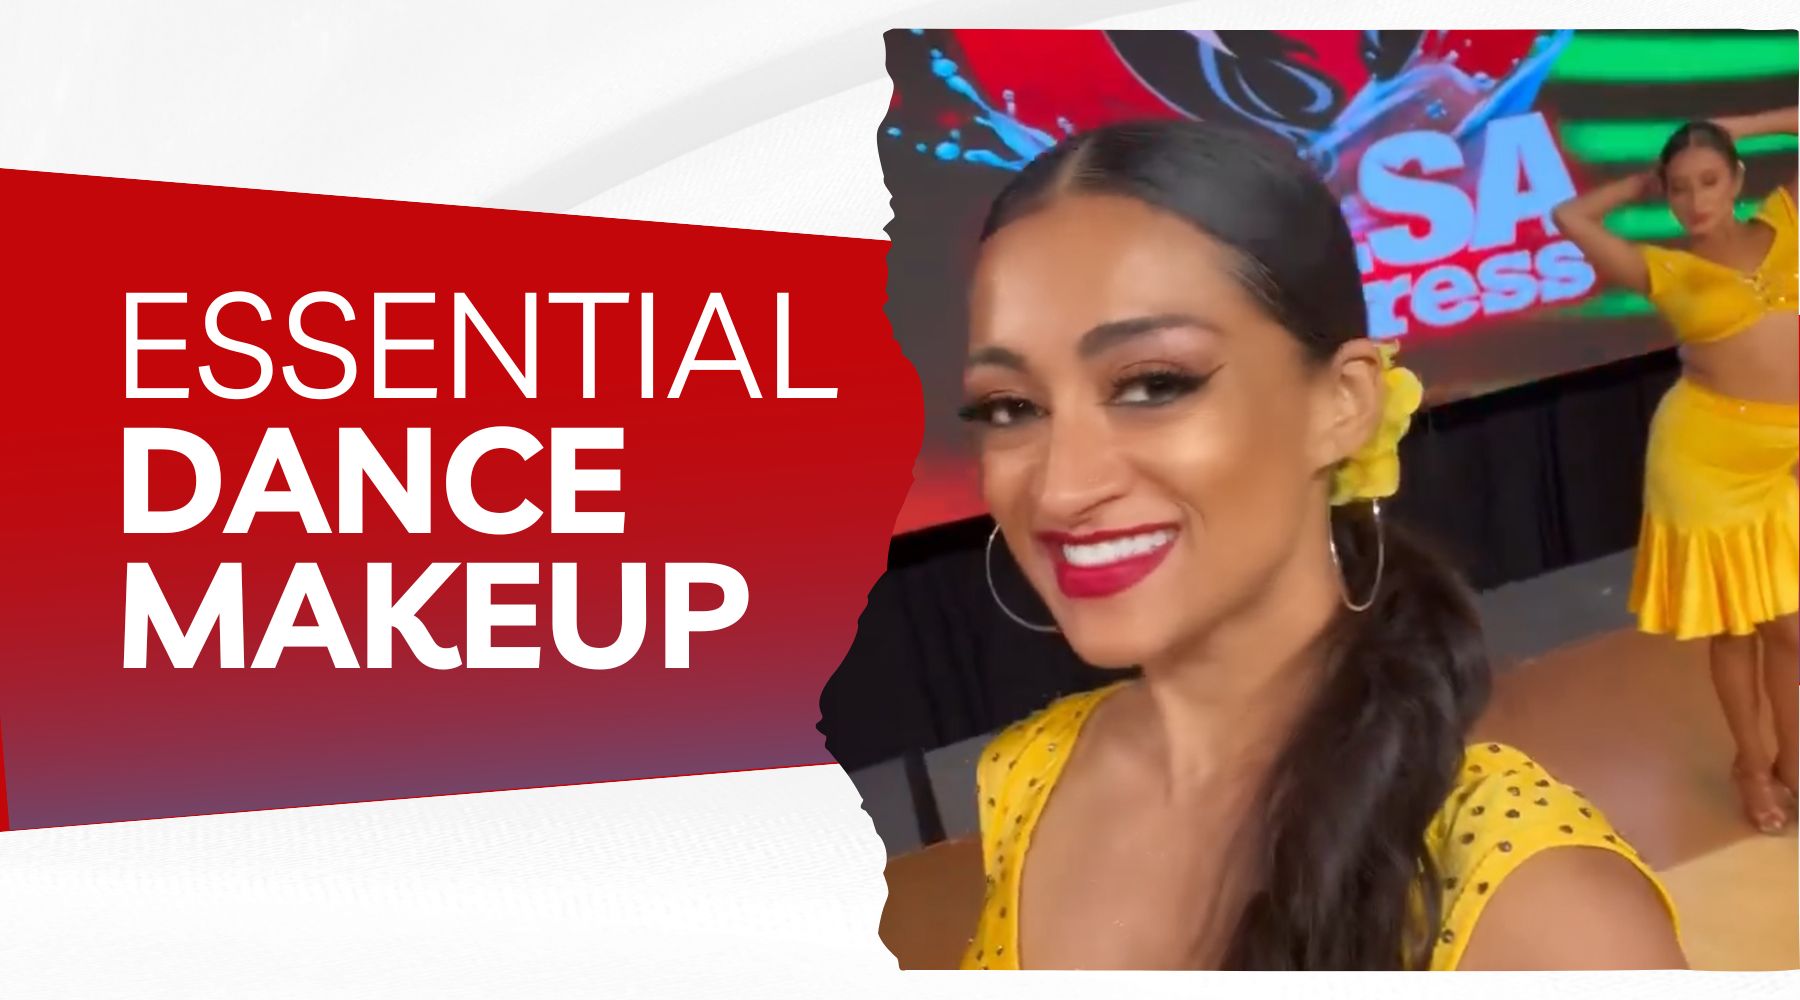 Dance Makeup and Performance Makeup tested by dancers